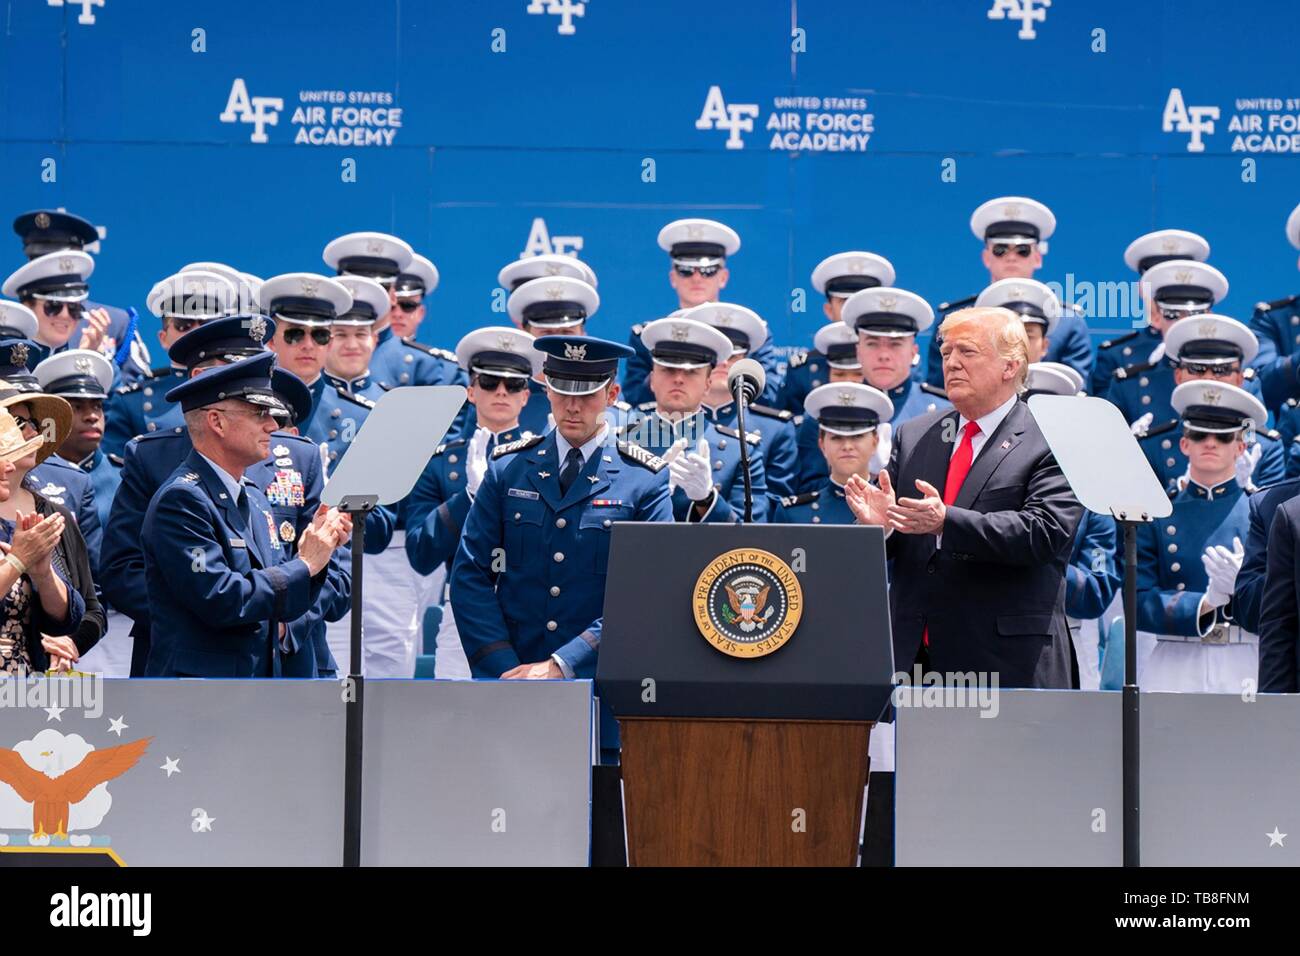 U.S President Donald Trump applauds after concluding his remarks at the U.S. Air Force Academy Graduation Ceremony at the USAF Academy Falcon Stadium May 30, 2019 in Colorado Springs, Colorado. Credit: Planetpix/Alamy Live News Stock Photo